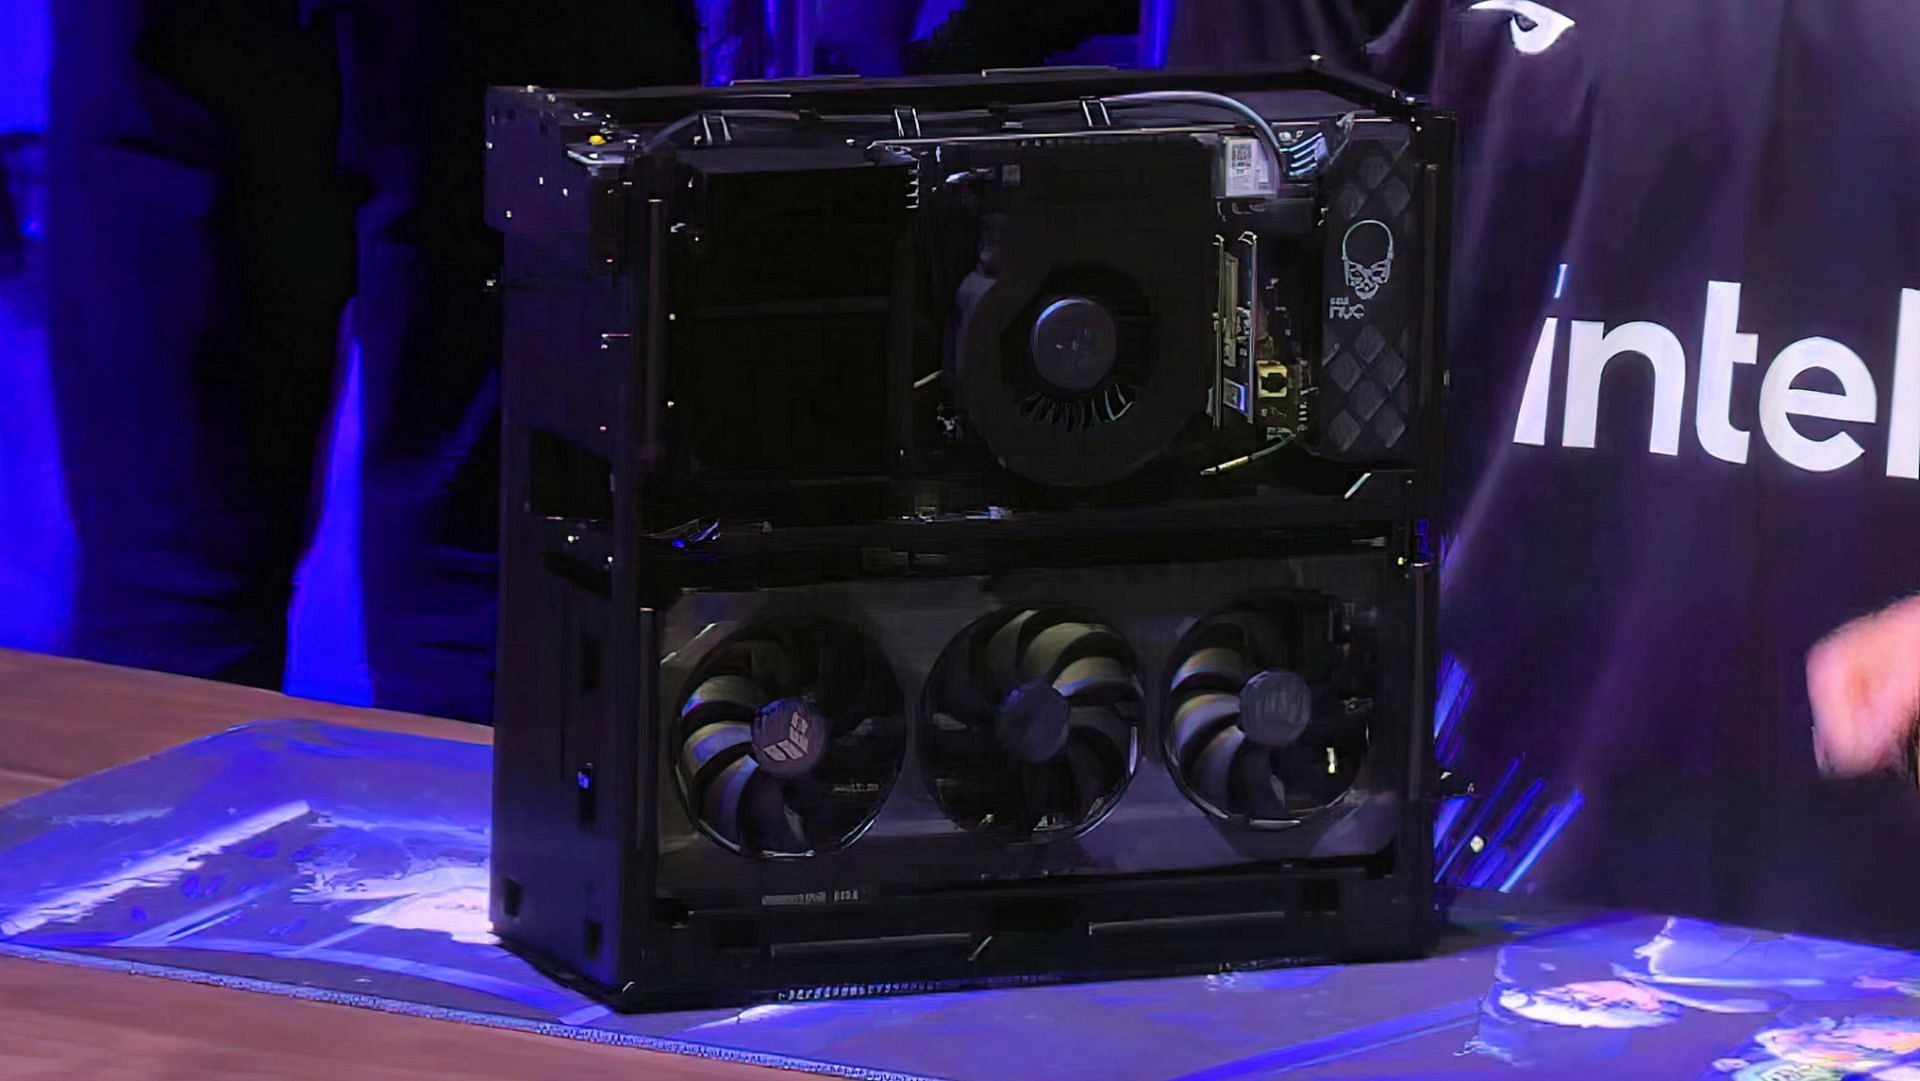 A new NUC model has been shown at Twitchcon (Image via Intel)